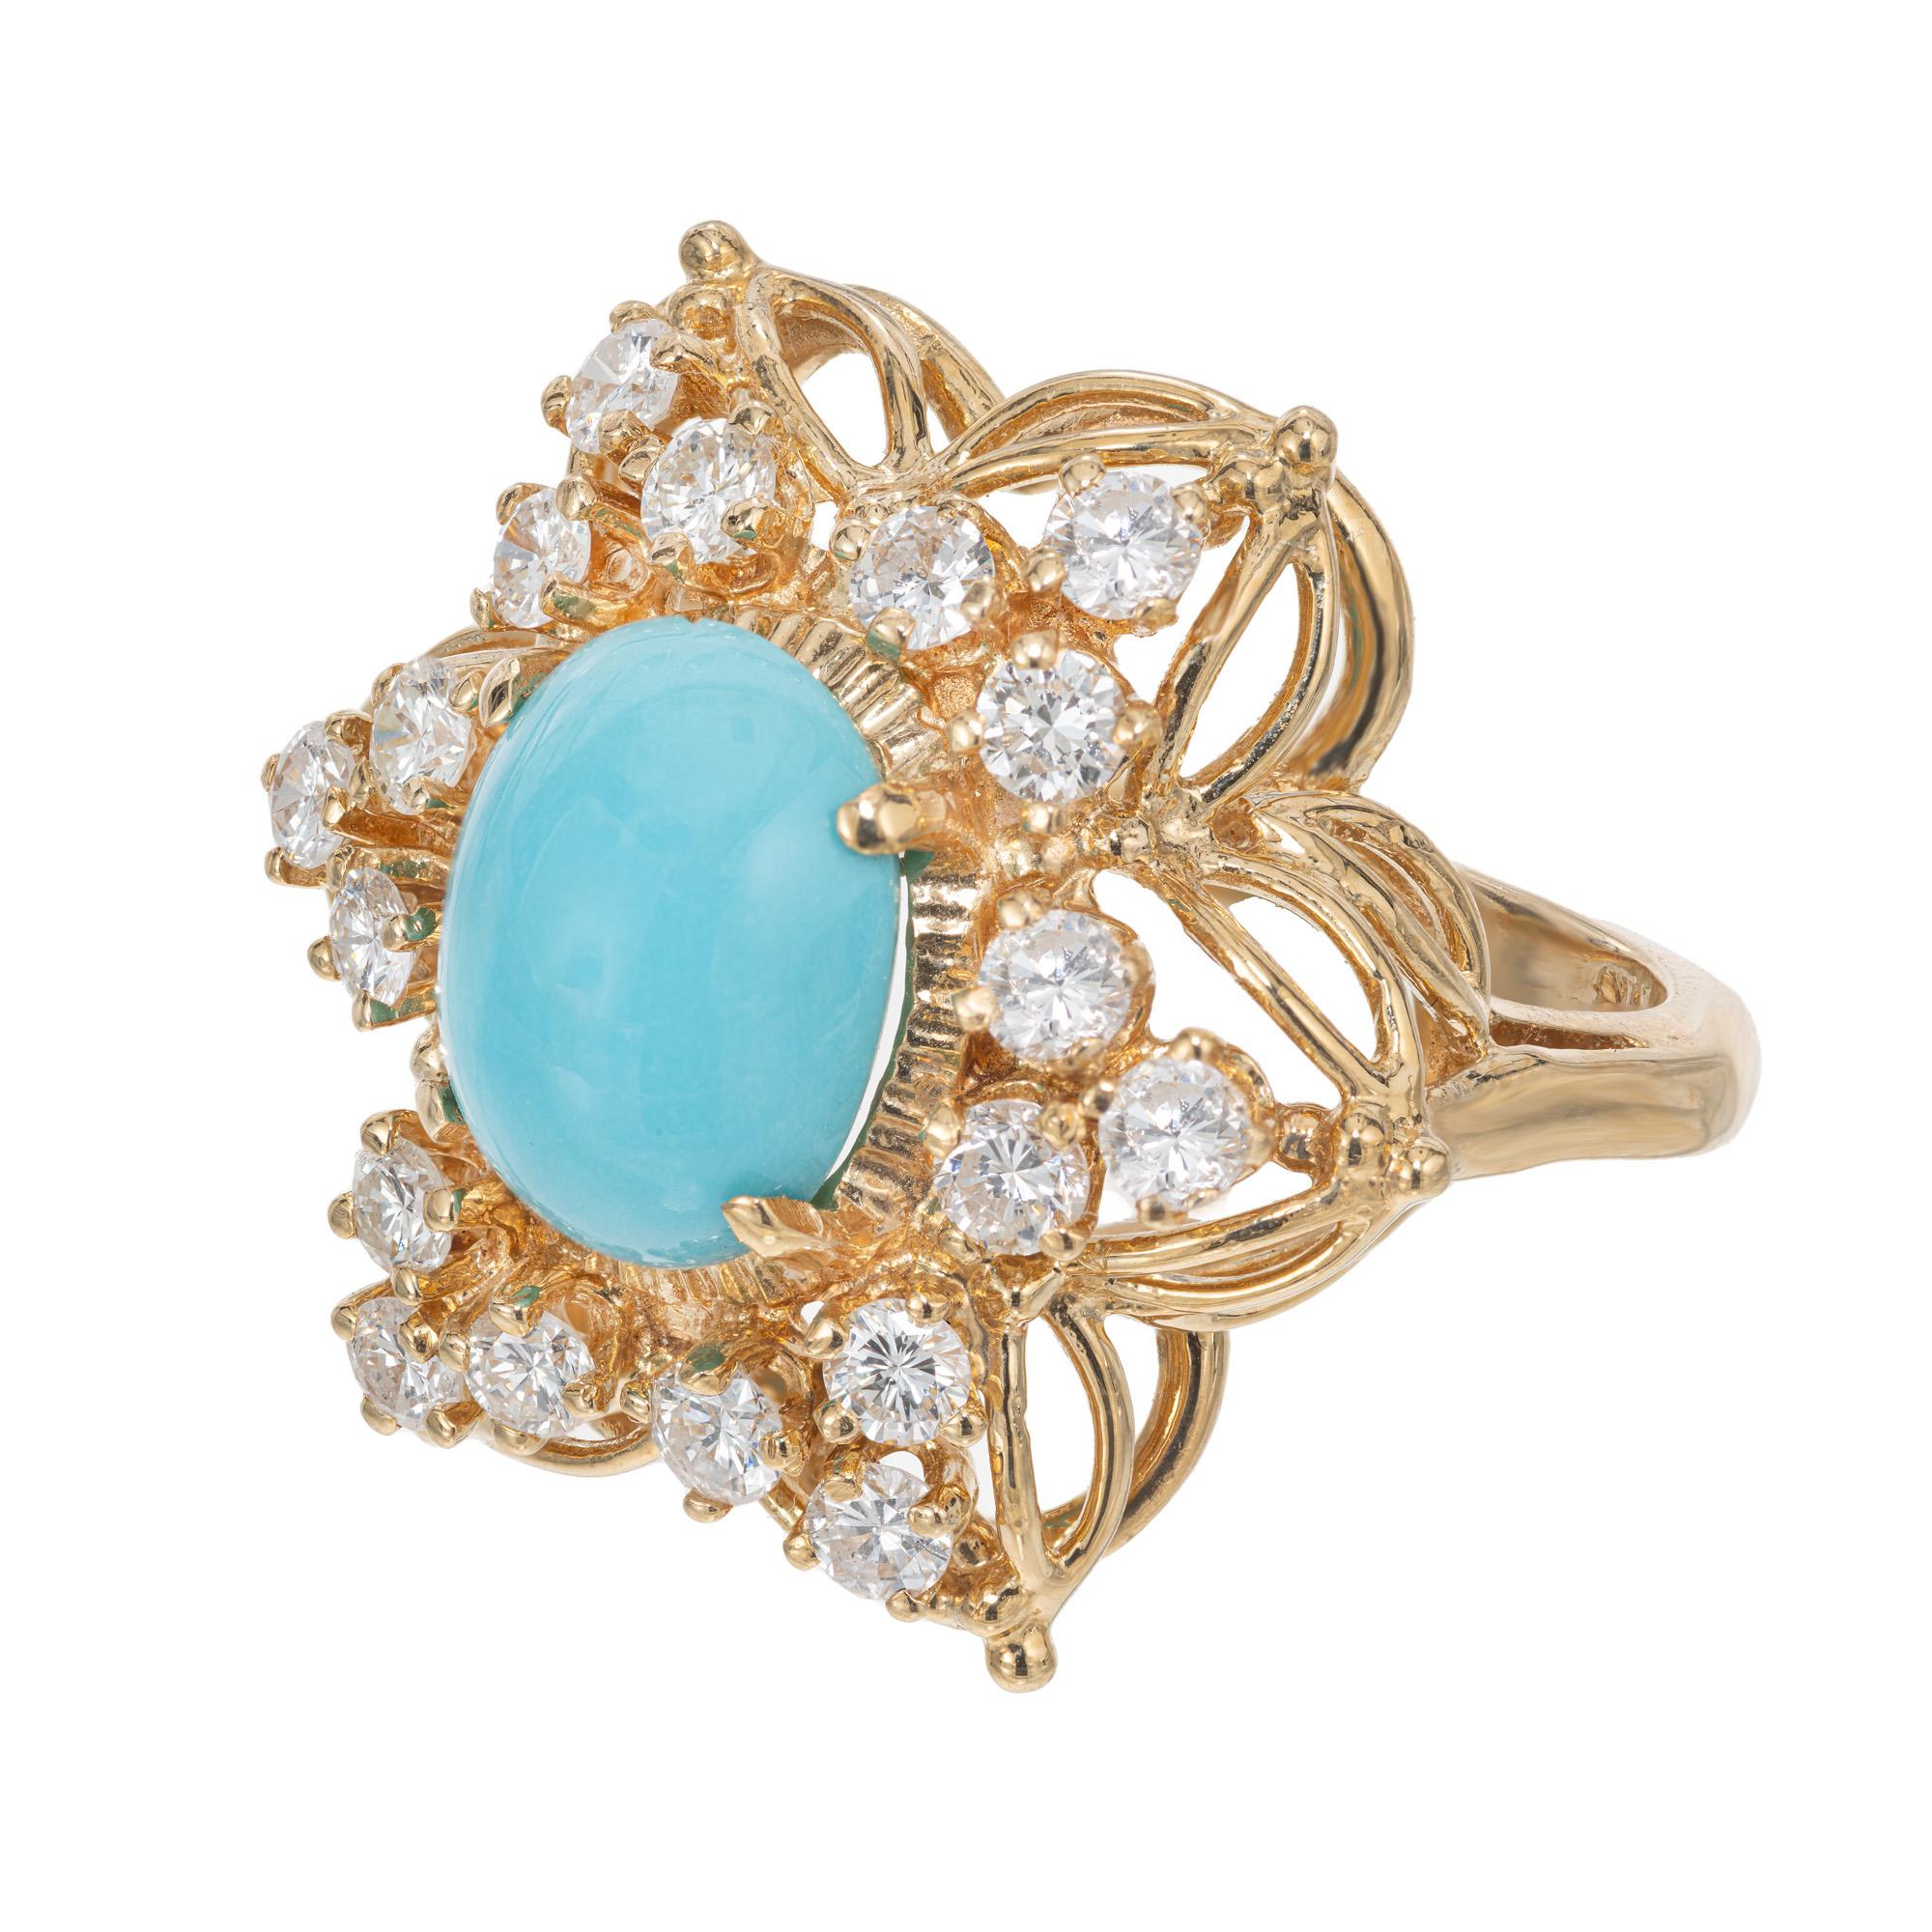 Stunning vintage 1950s Turquoise and diamond cocktail ring. GIA certified cabochon blue 3.25ct turquoise center stone, mounted in a 14k yellow gold cocktail ring setting. With a halo of 18 round cut diamonds totaling 1.17cts. The GIA has certified